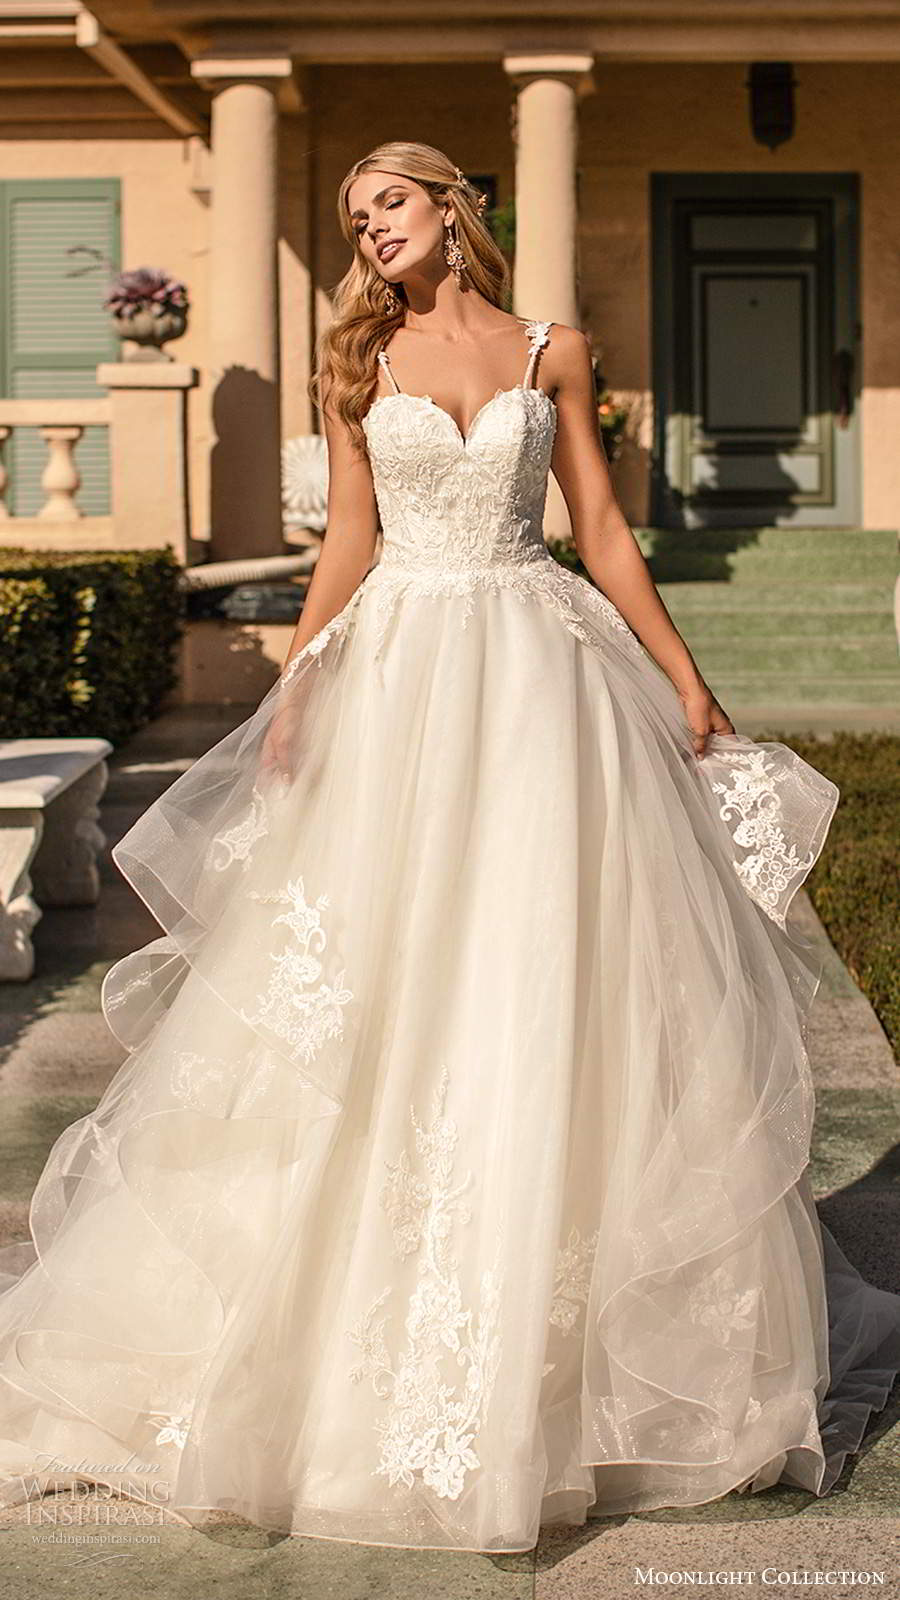 moonlight collection fall 2020 bridal sleeveless straps sweetheart neckline heavily embellished bodice a line ball gown wedding dress chapel train (10) mv